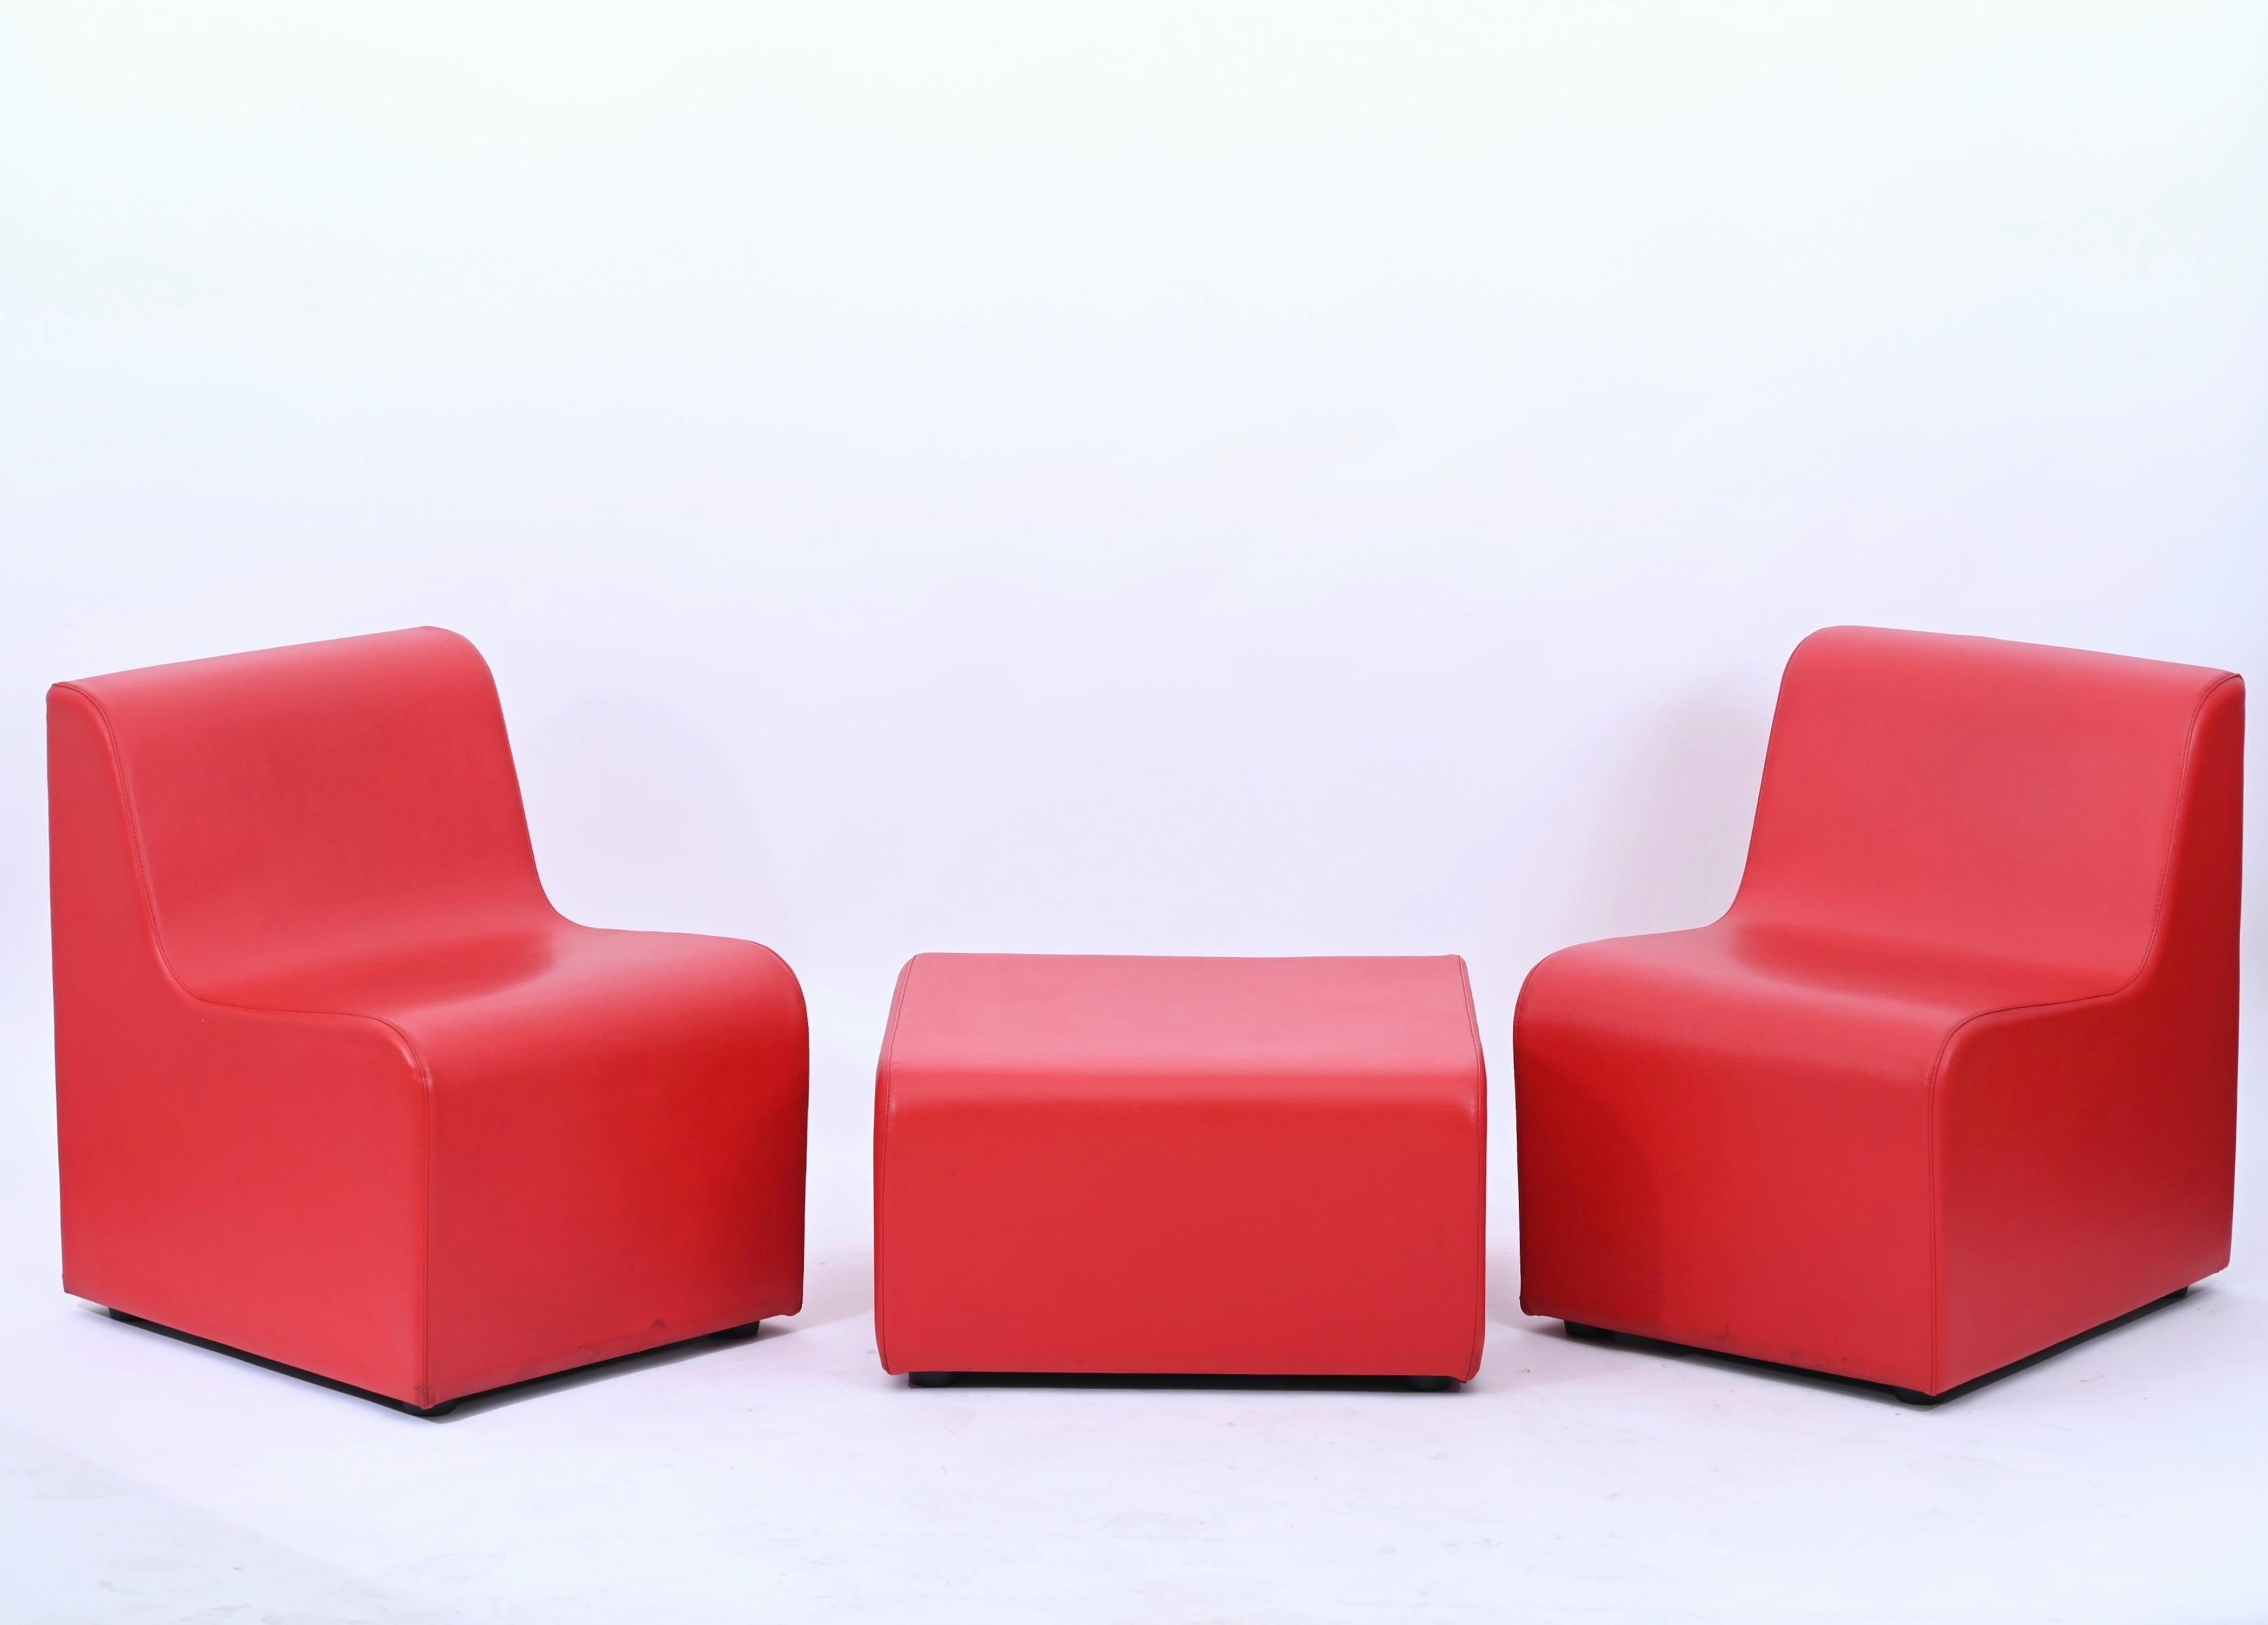 Beautiful red leatherette modular living room set composed by two chairs and a pouf. The set was produced in Italy in early 1980s.

The lines and colors of the chairs are typical example of 70s/80s furniture designs. The chairs can also be used as